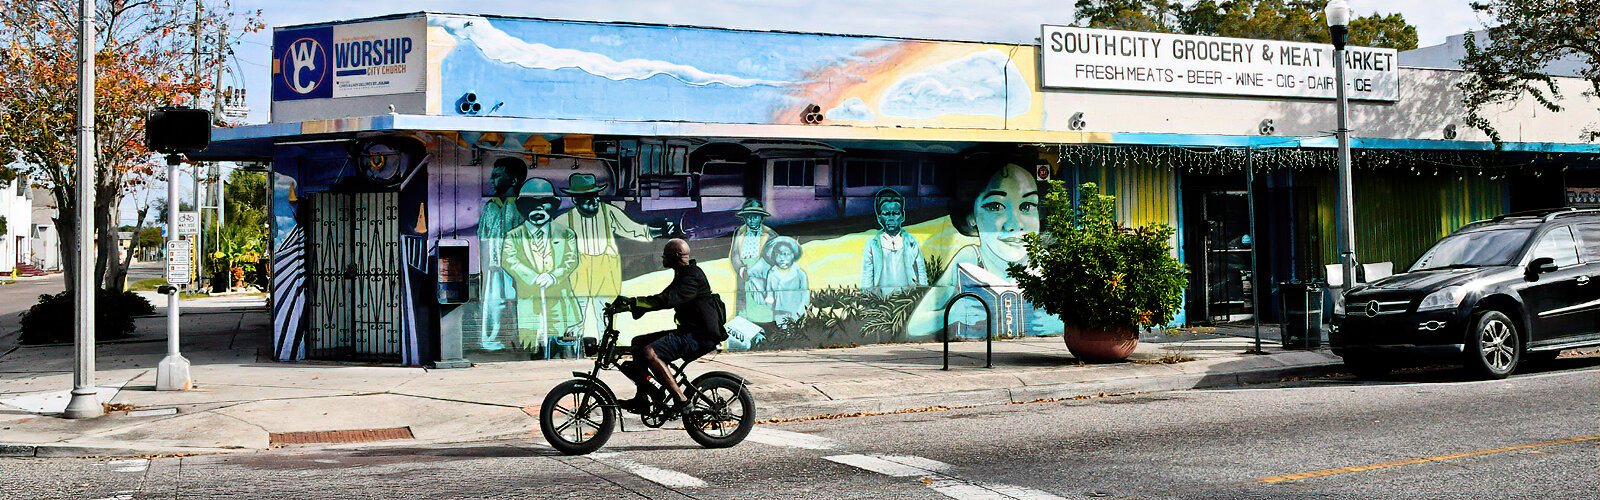 Once home to the city’s thriving Black Main Street, the 22nd Street South corridor is the main artery of The Deuces neighborhood in South St Petersburg.